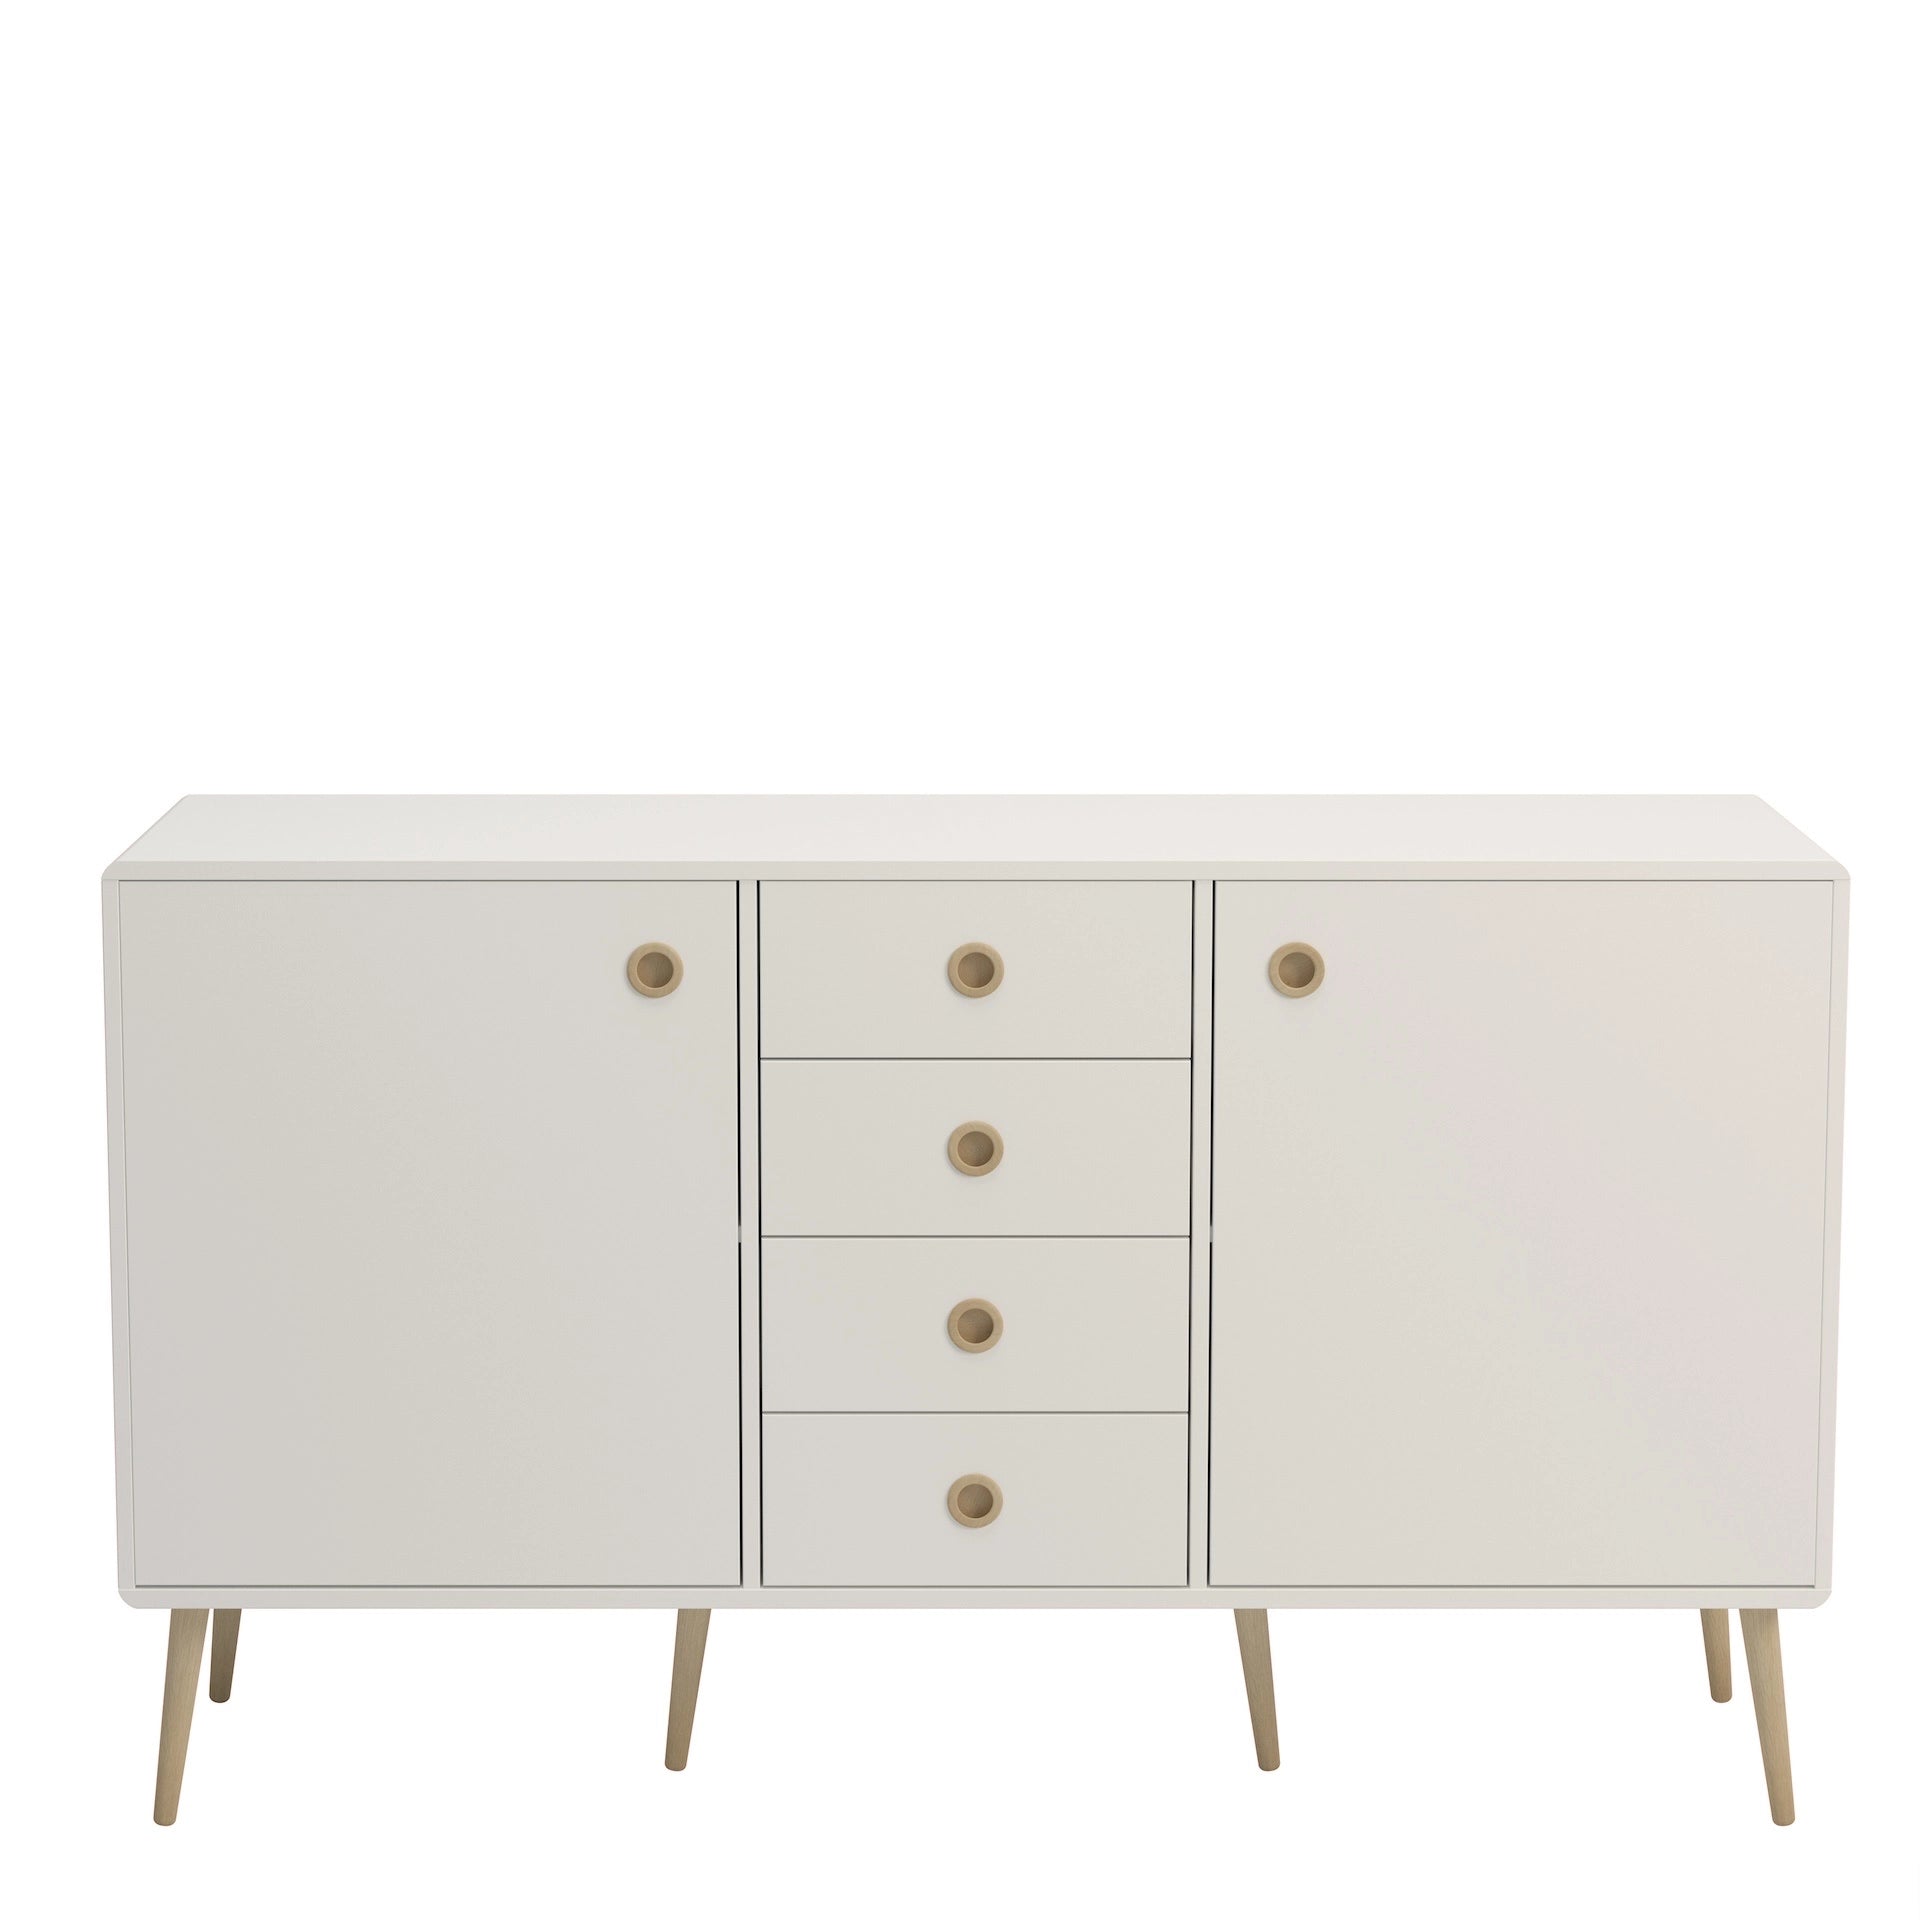 Furniture To Go Softline Sideboard 2 Doors + 4 Drawers, White 050